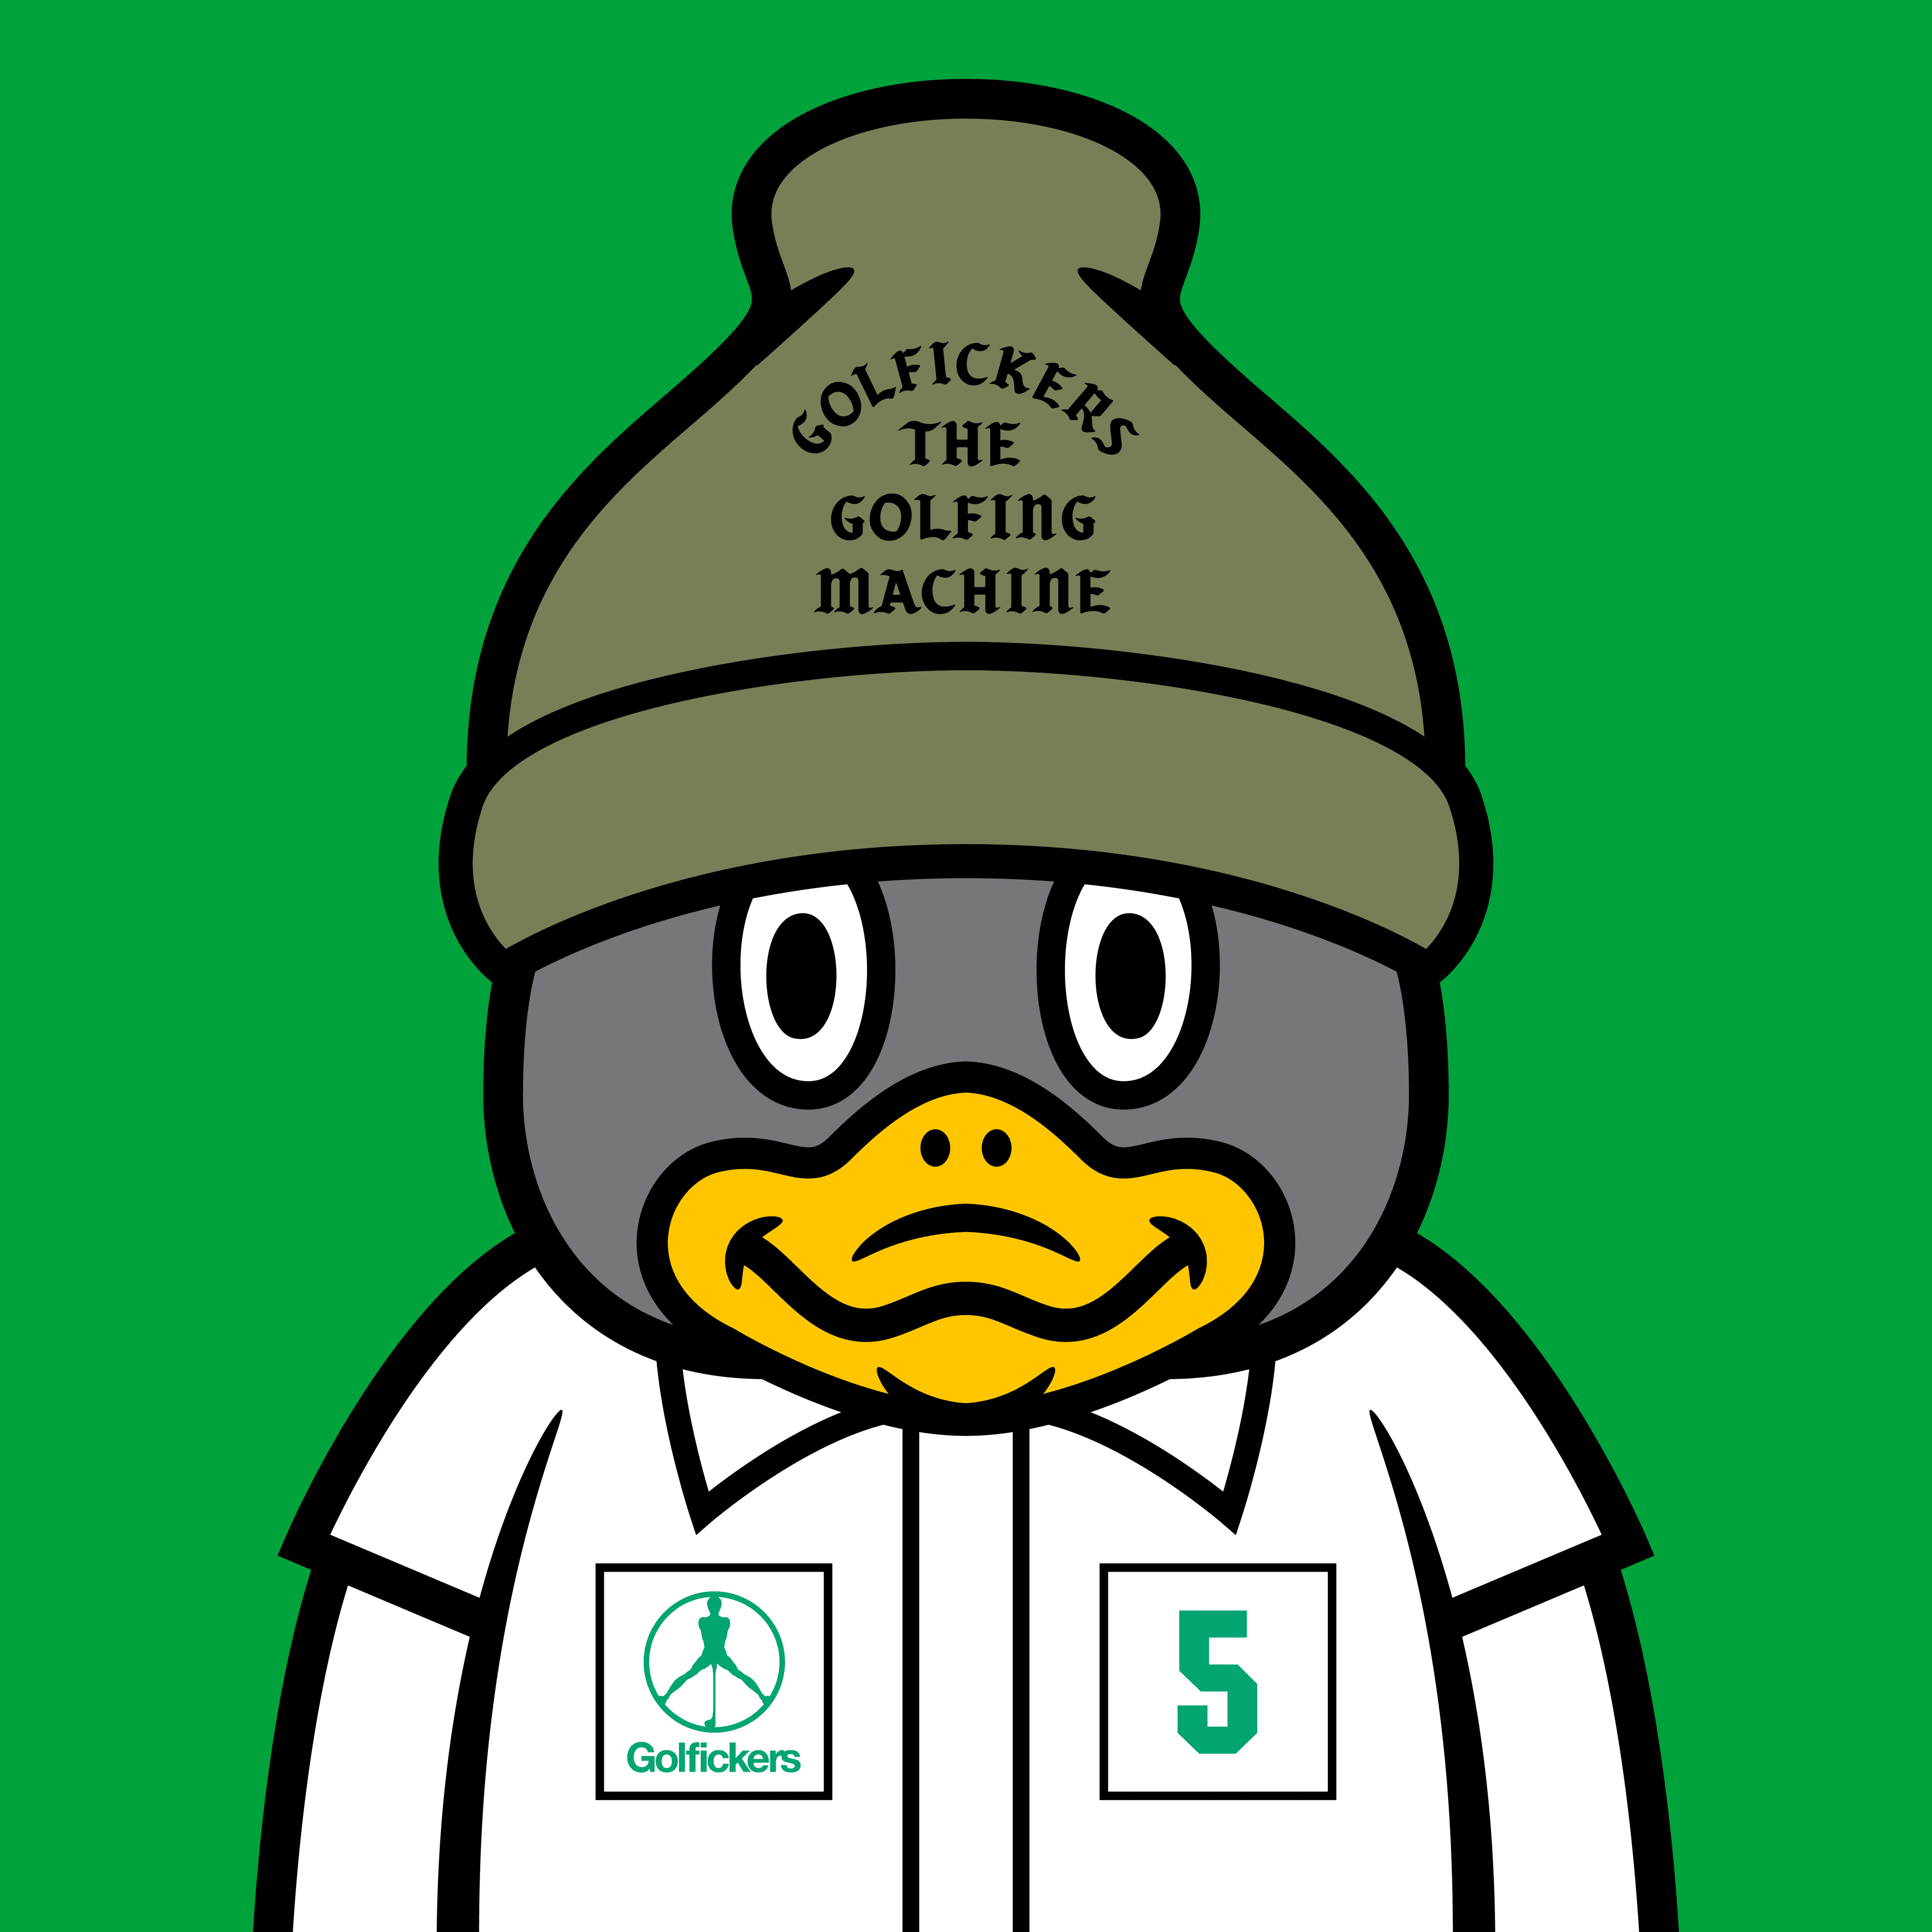 Golfickers The Duck #0005